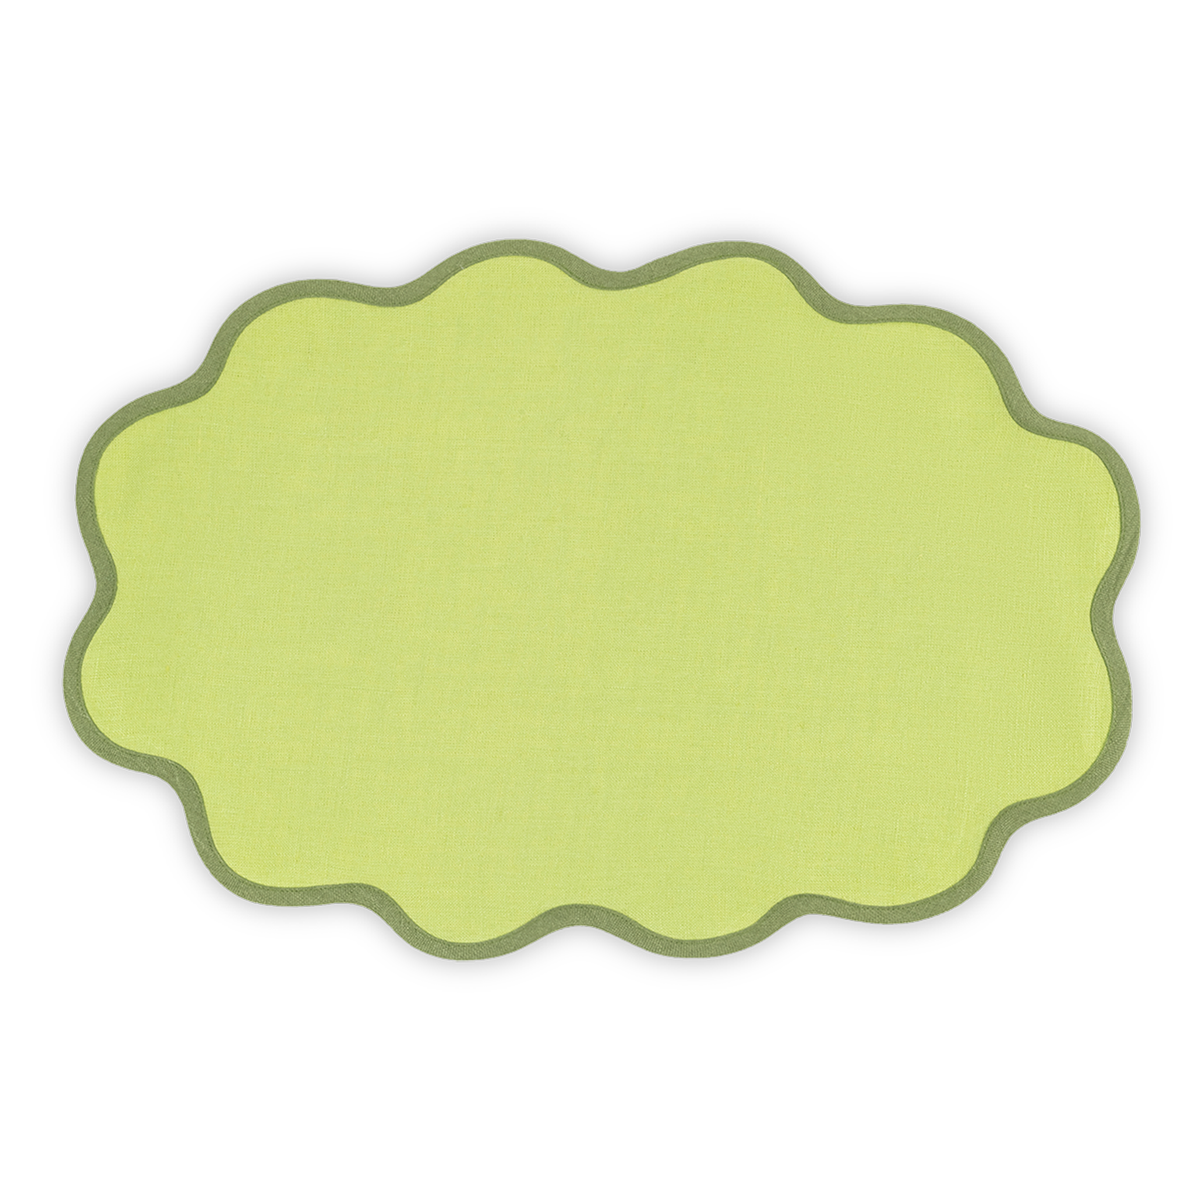 Oval Placemat of Matouk Scallop Edge Table Linens in Color Peridot/Grass